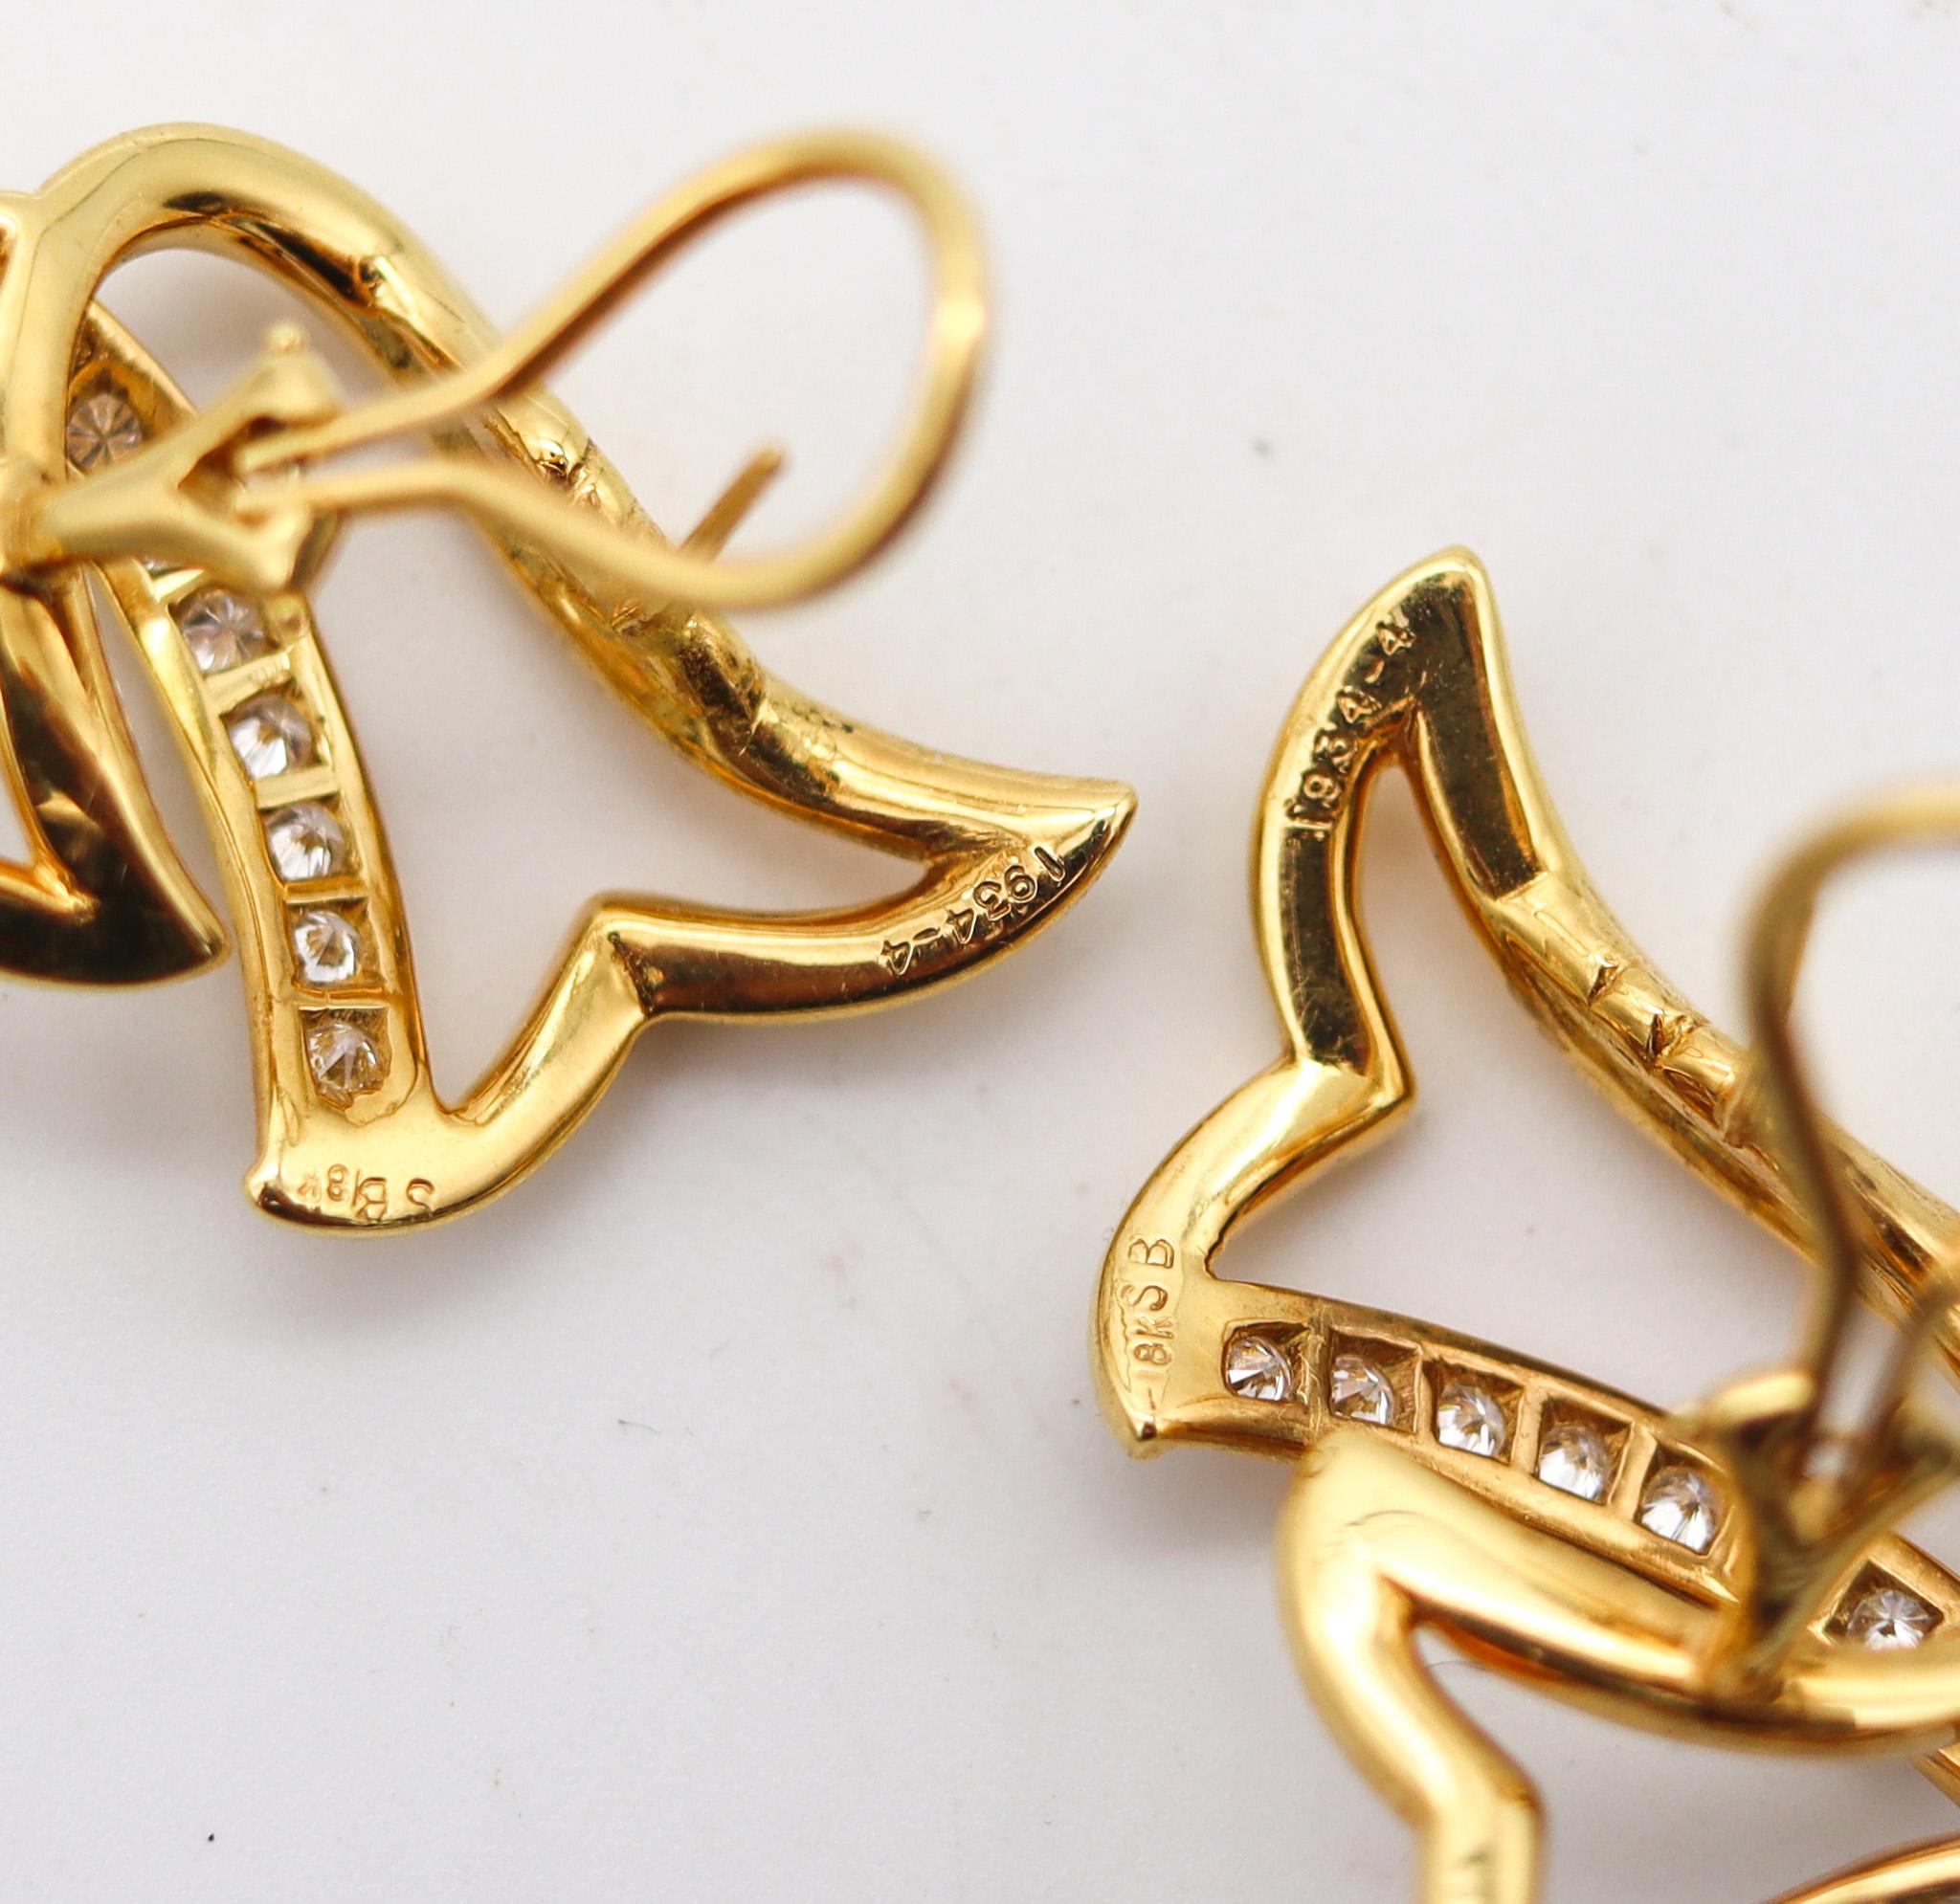 Brilliant Cut Sonia Bitton Sculptural Free Form Earrings In 18Kt Gold With 1.58 Ctw Diamonds For Sale